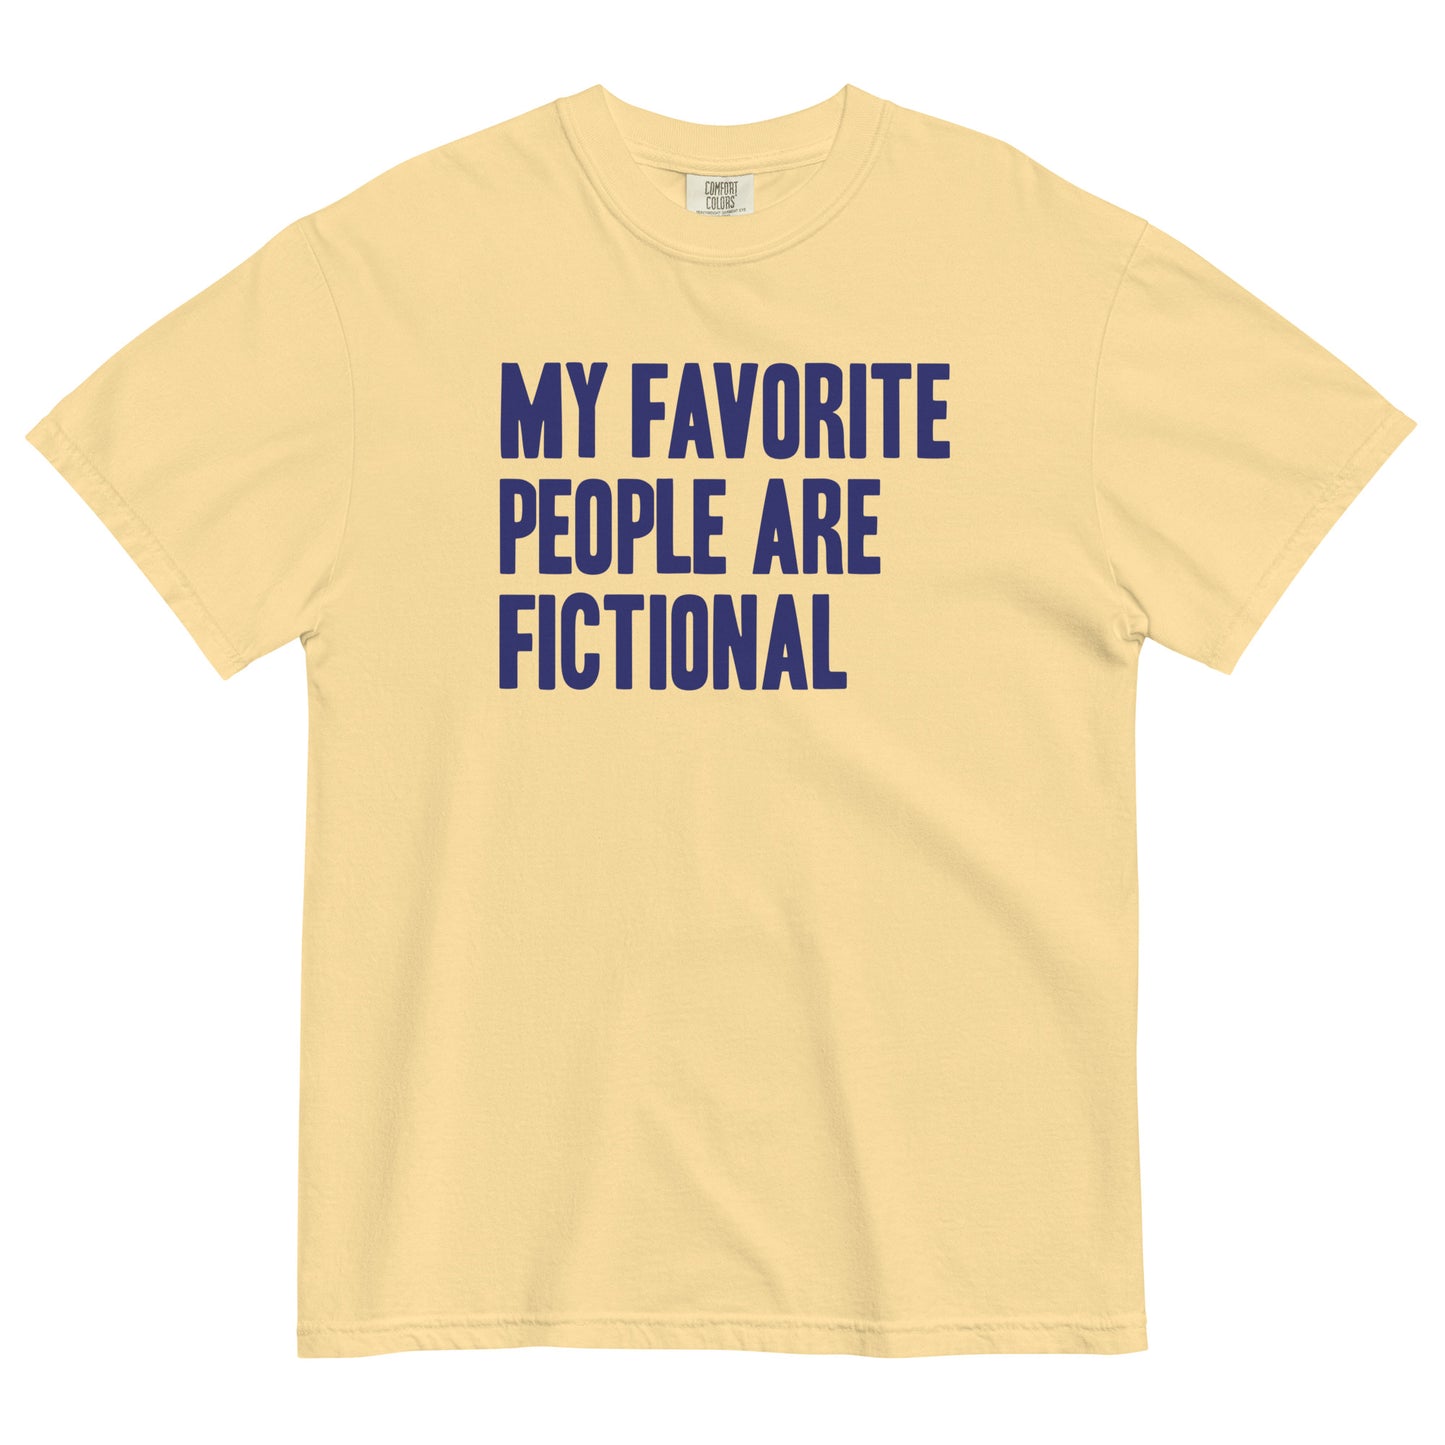 My Favorite People Are Fictional Men's Relaxed Fit Tee